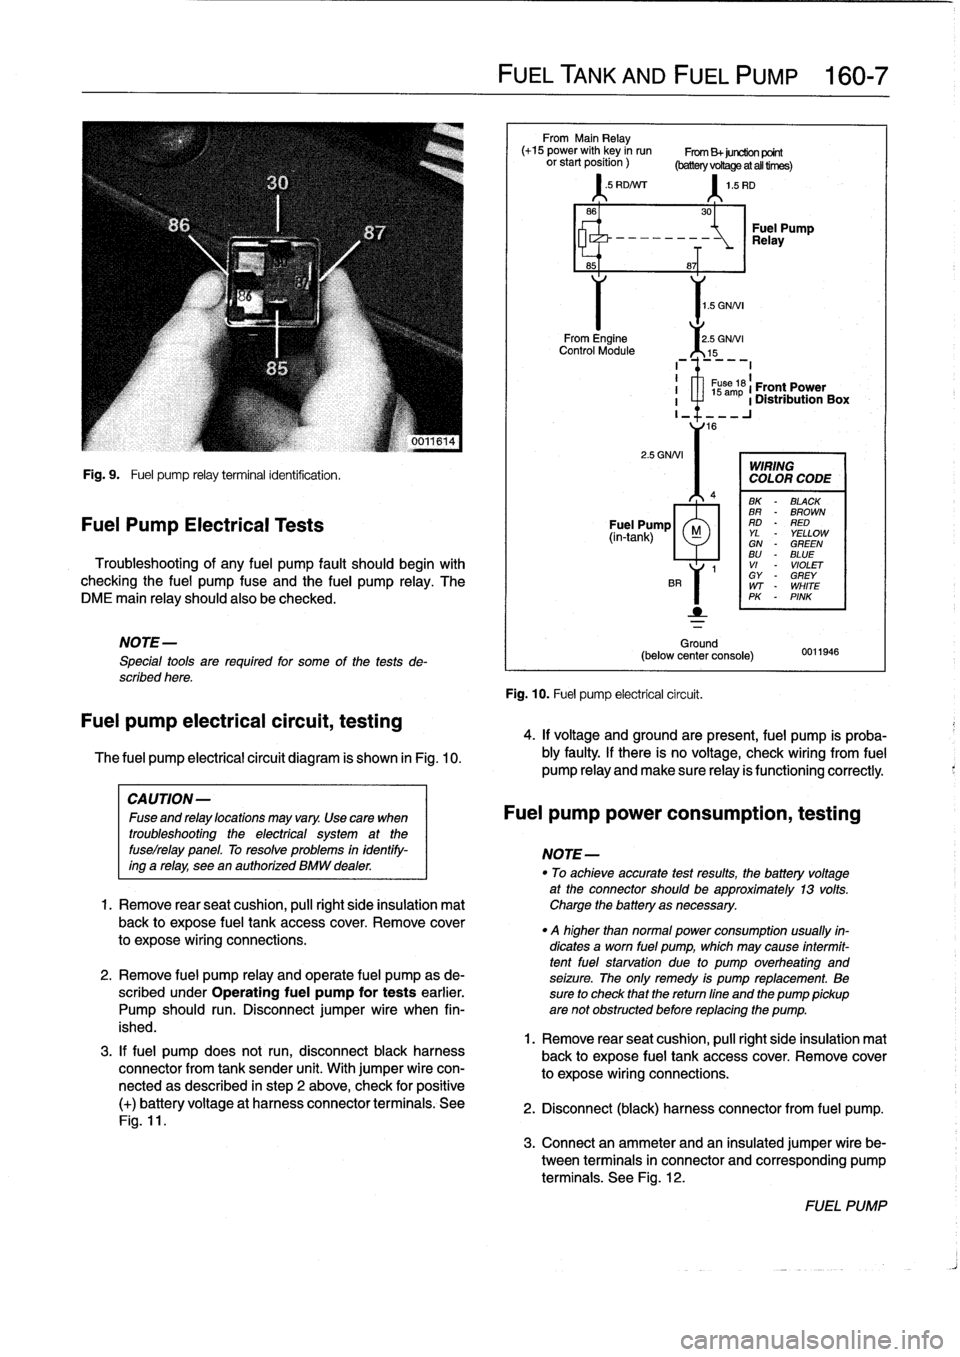 BMW 318i 1997 E36 Workshop Manual 
Fig
.
9
.

	

Fuel
pump
relay
terminal
identification
.

Fuel
Pump
Electrical
Tests

Troubleshooting
of
any
fuel
pump
fault
should
begin
with

checking
the
fuel
pump
fuse
and
the
fuel
pump
relay
.
Th